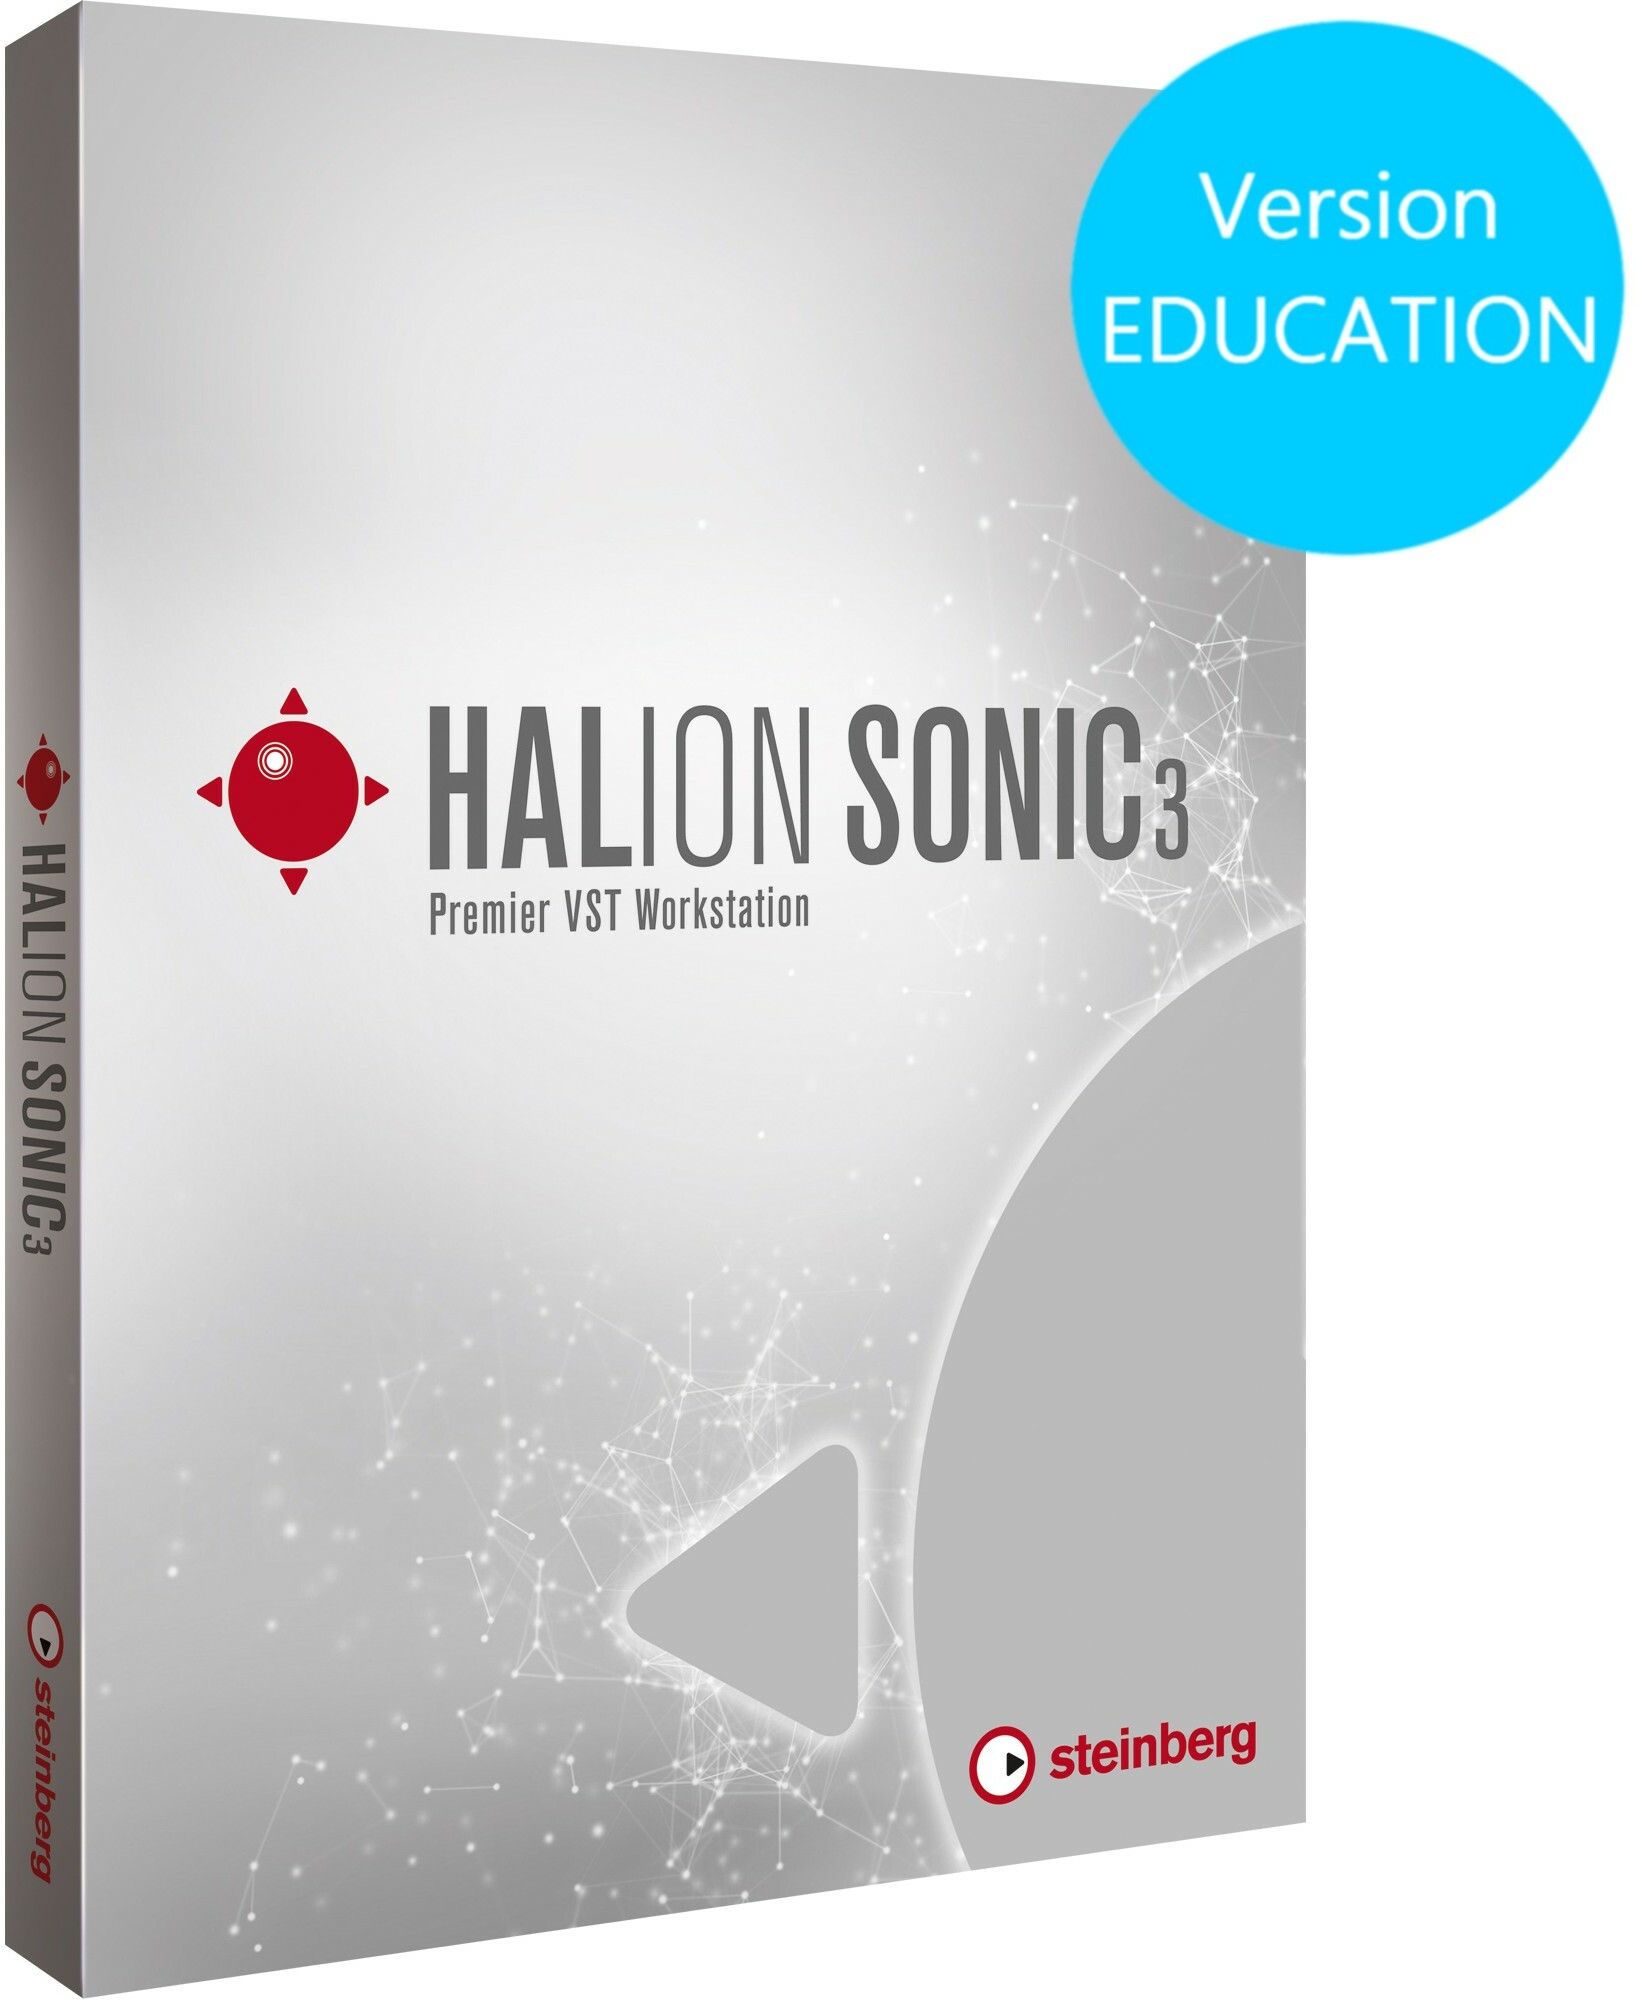 Steinberg Halion Sonic 3 Education - Sound bank - Main picture